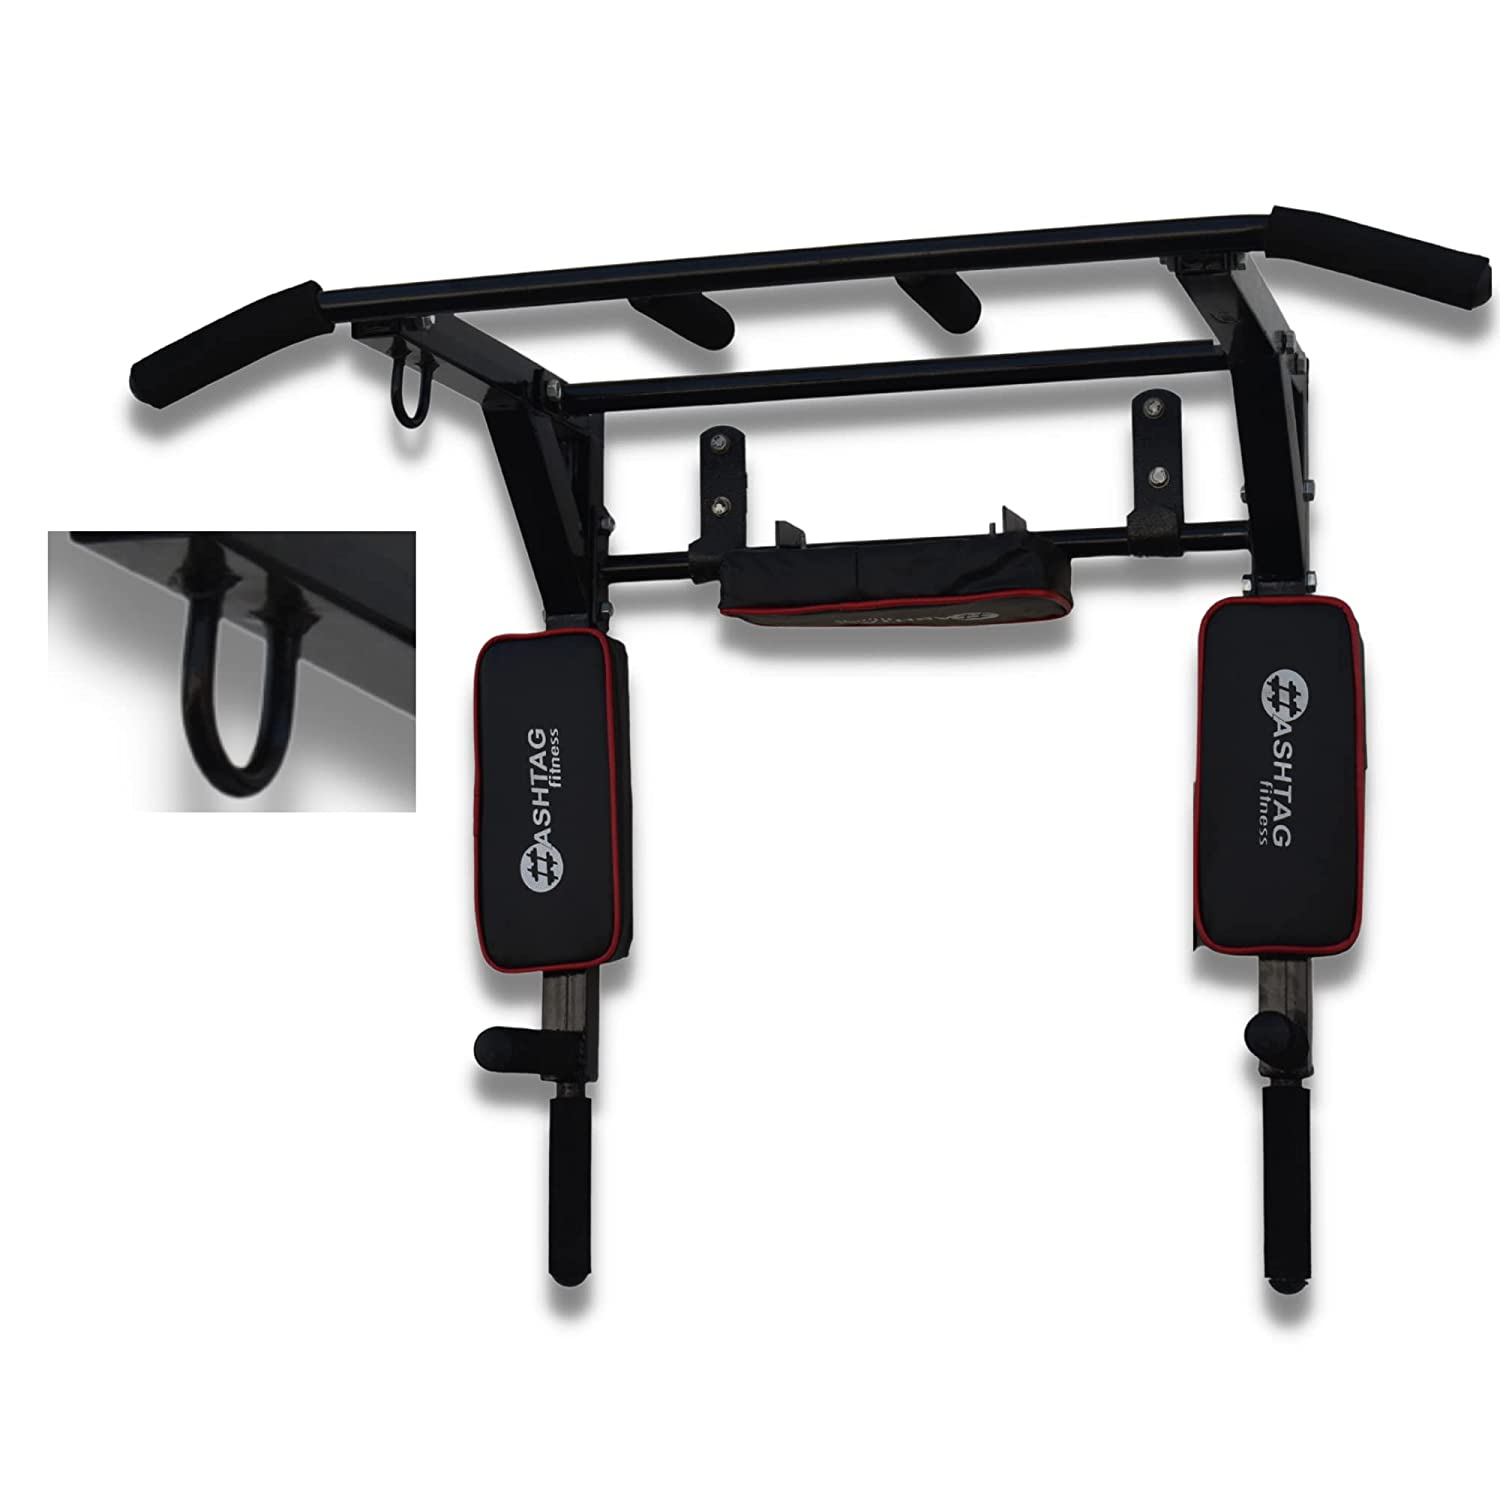 HASHTAG FITNESS Wall mount pull up bar